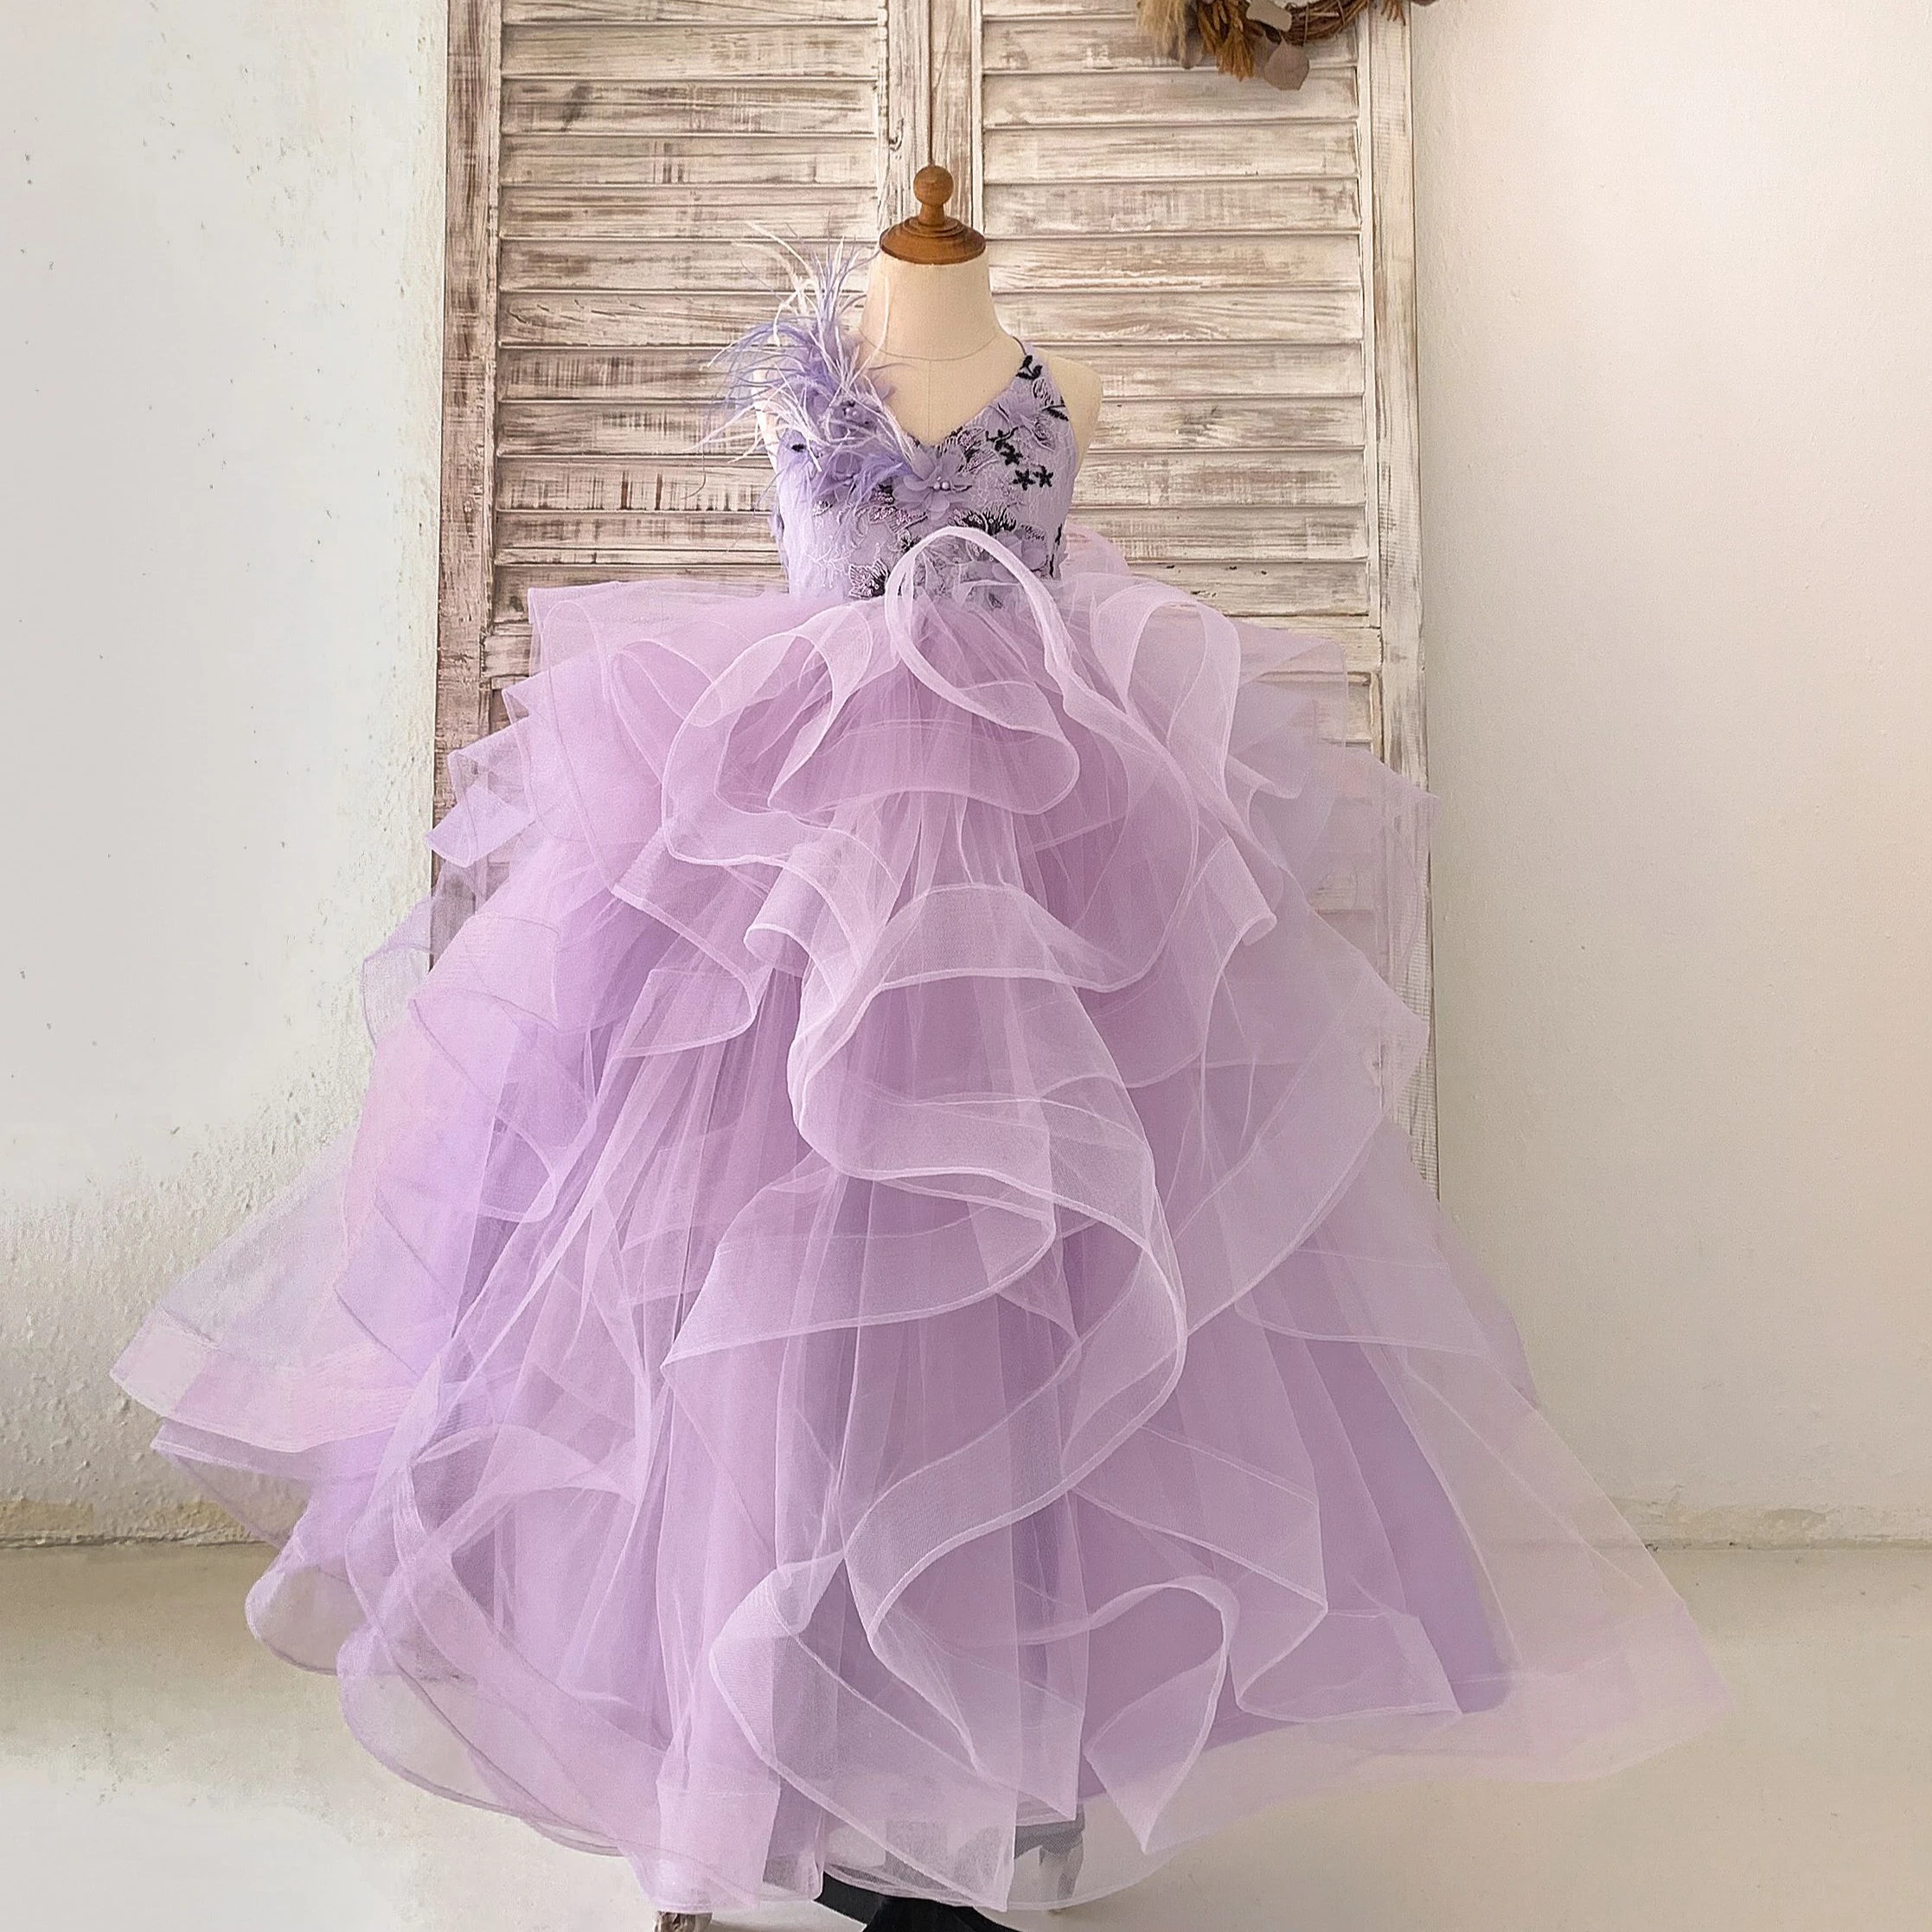 

Lavender Purple Tulle 3D Beaded Lace Wedding Flower Girl Dress Kids Party Dress Princess Birthday Gown Puffy Couture Dress